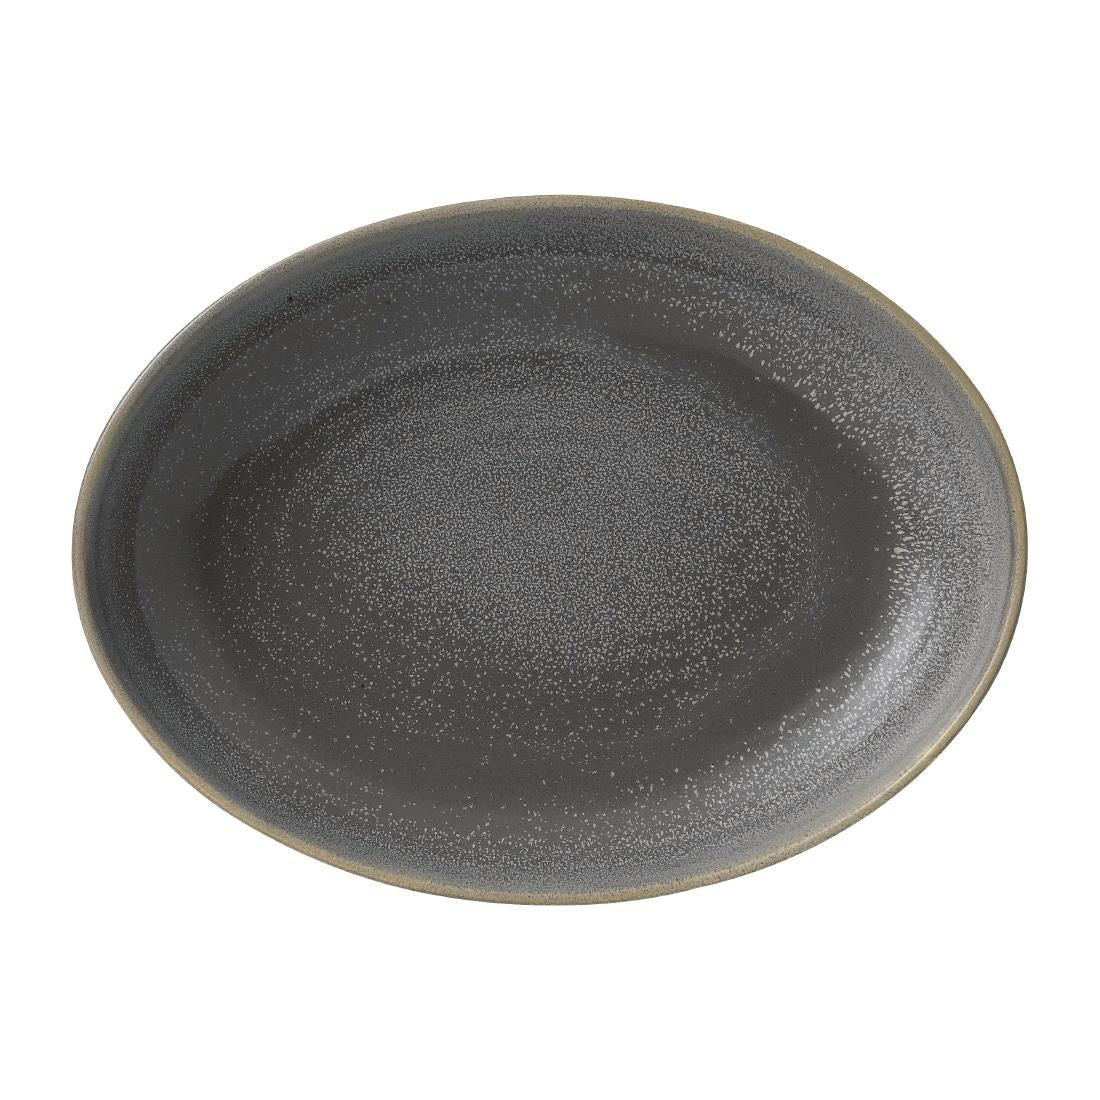 FE301 Dudson Evo Granite Deep Oval Bowl 267 x 196mm (Pack of 6) JD Catering Equipment Solutions Ltd